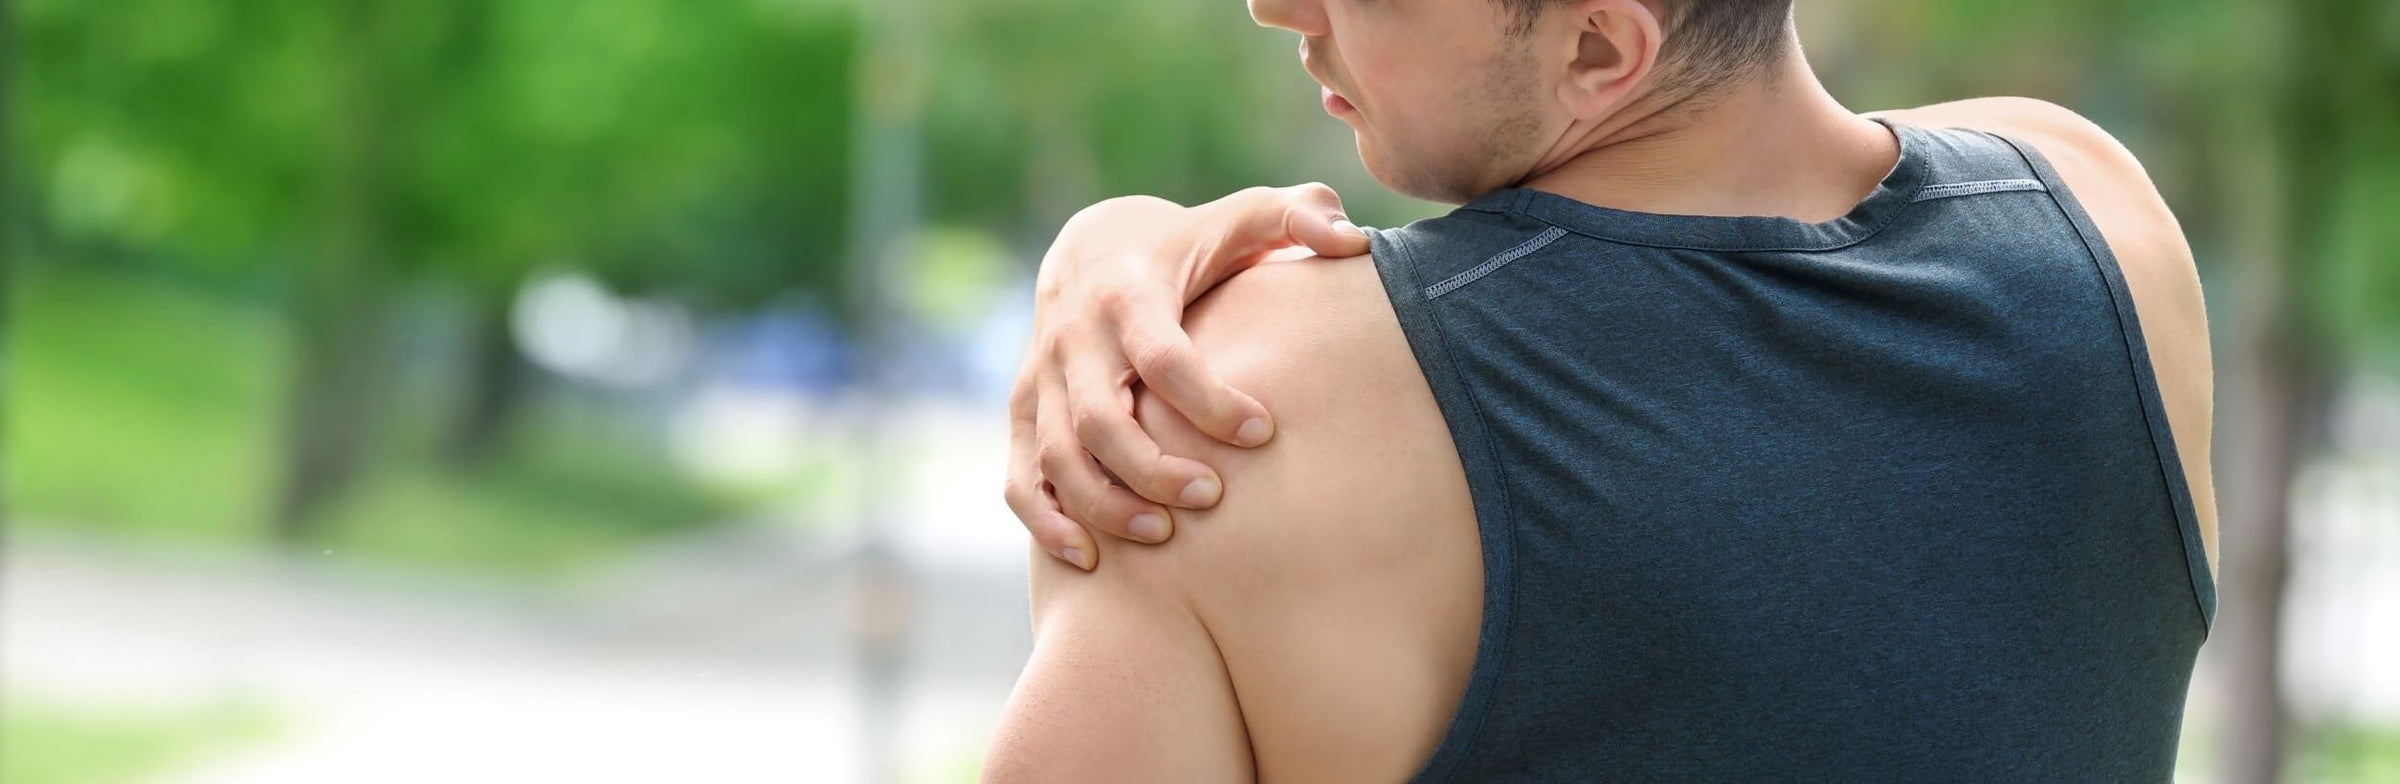 Man suffering from shoulder instability issue